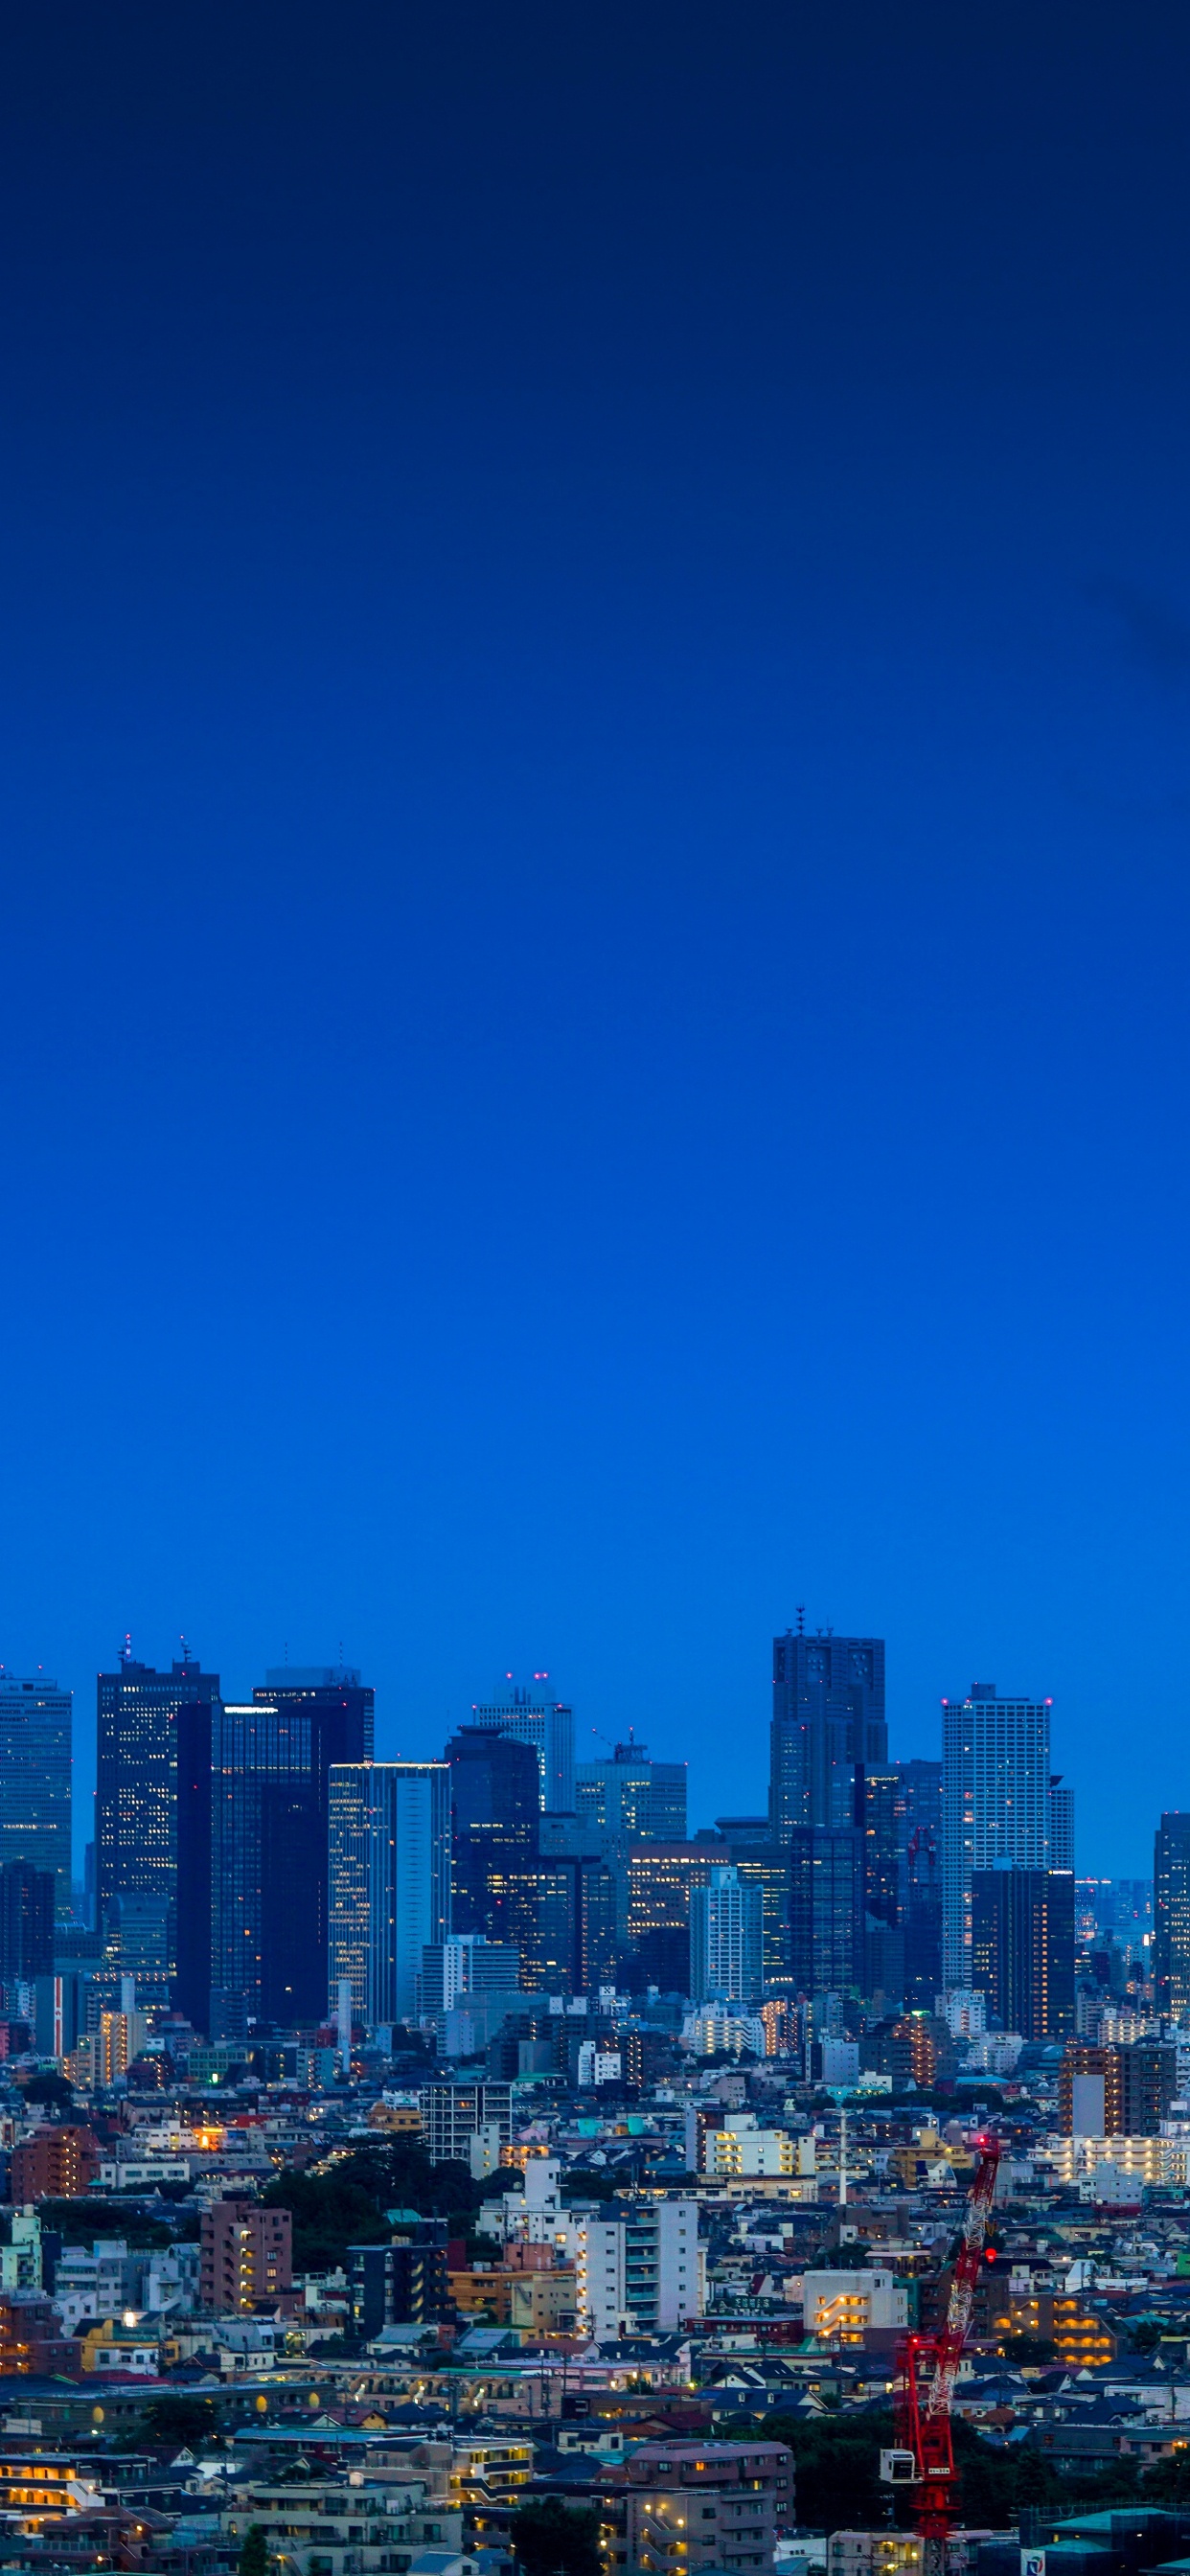 City With High Rise Buildings Under Blue Sky During Daytime. Wallpaper in 1242x2688 Resolution